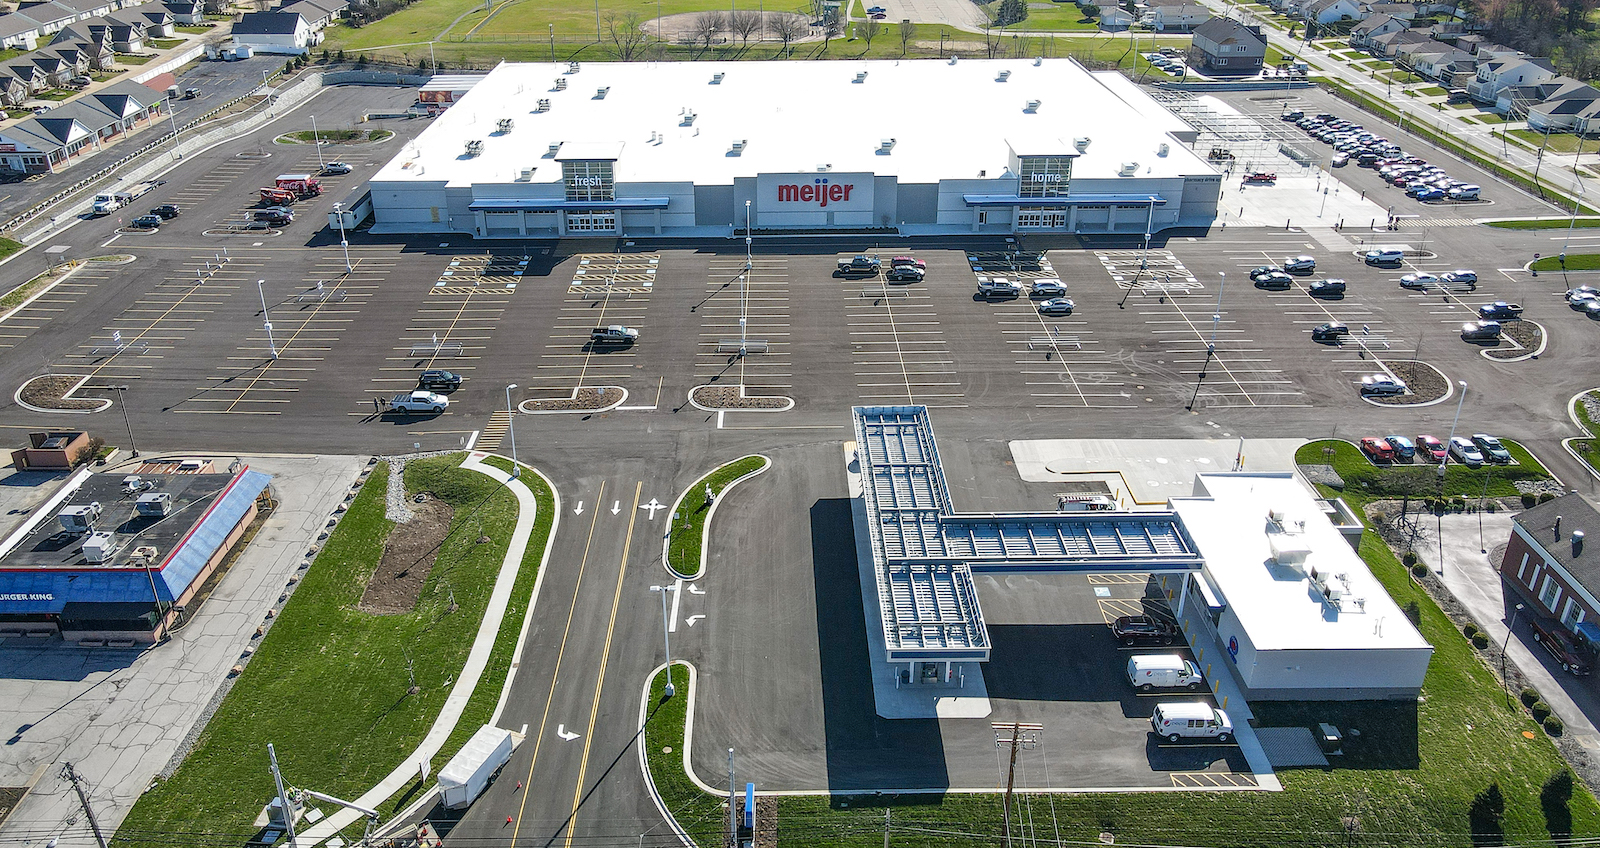 An aerial shot of the meijer building and parking lot with parked cars throughout the lot.